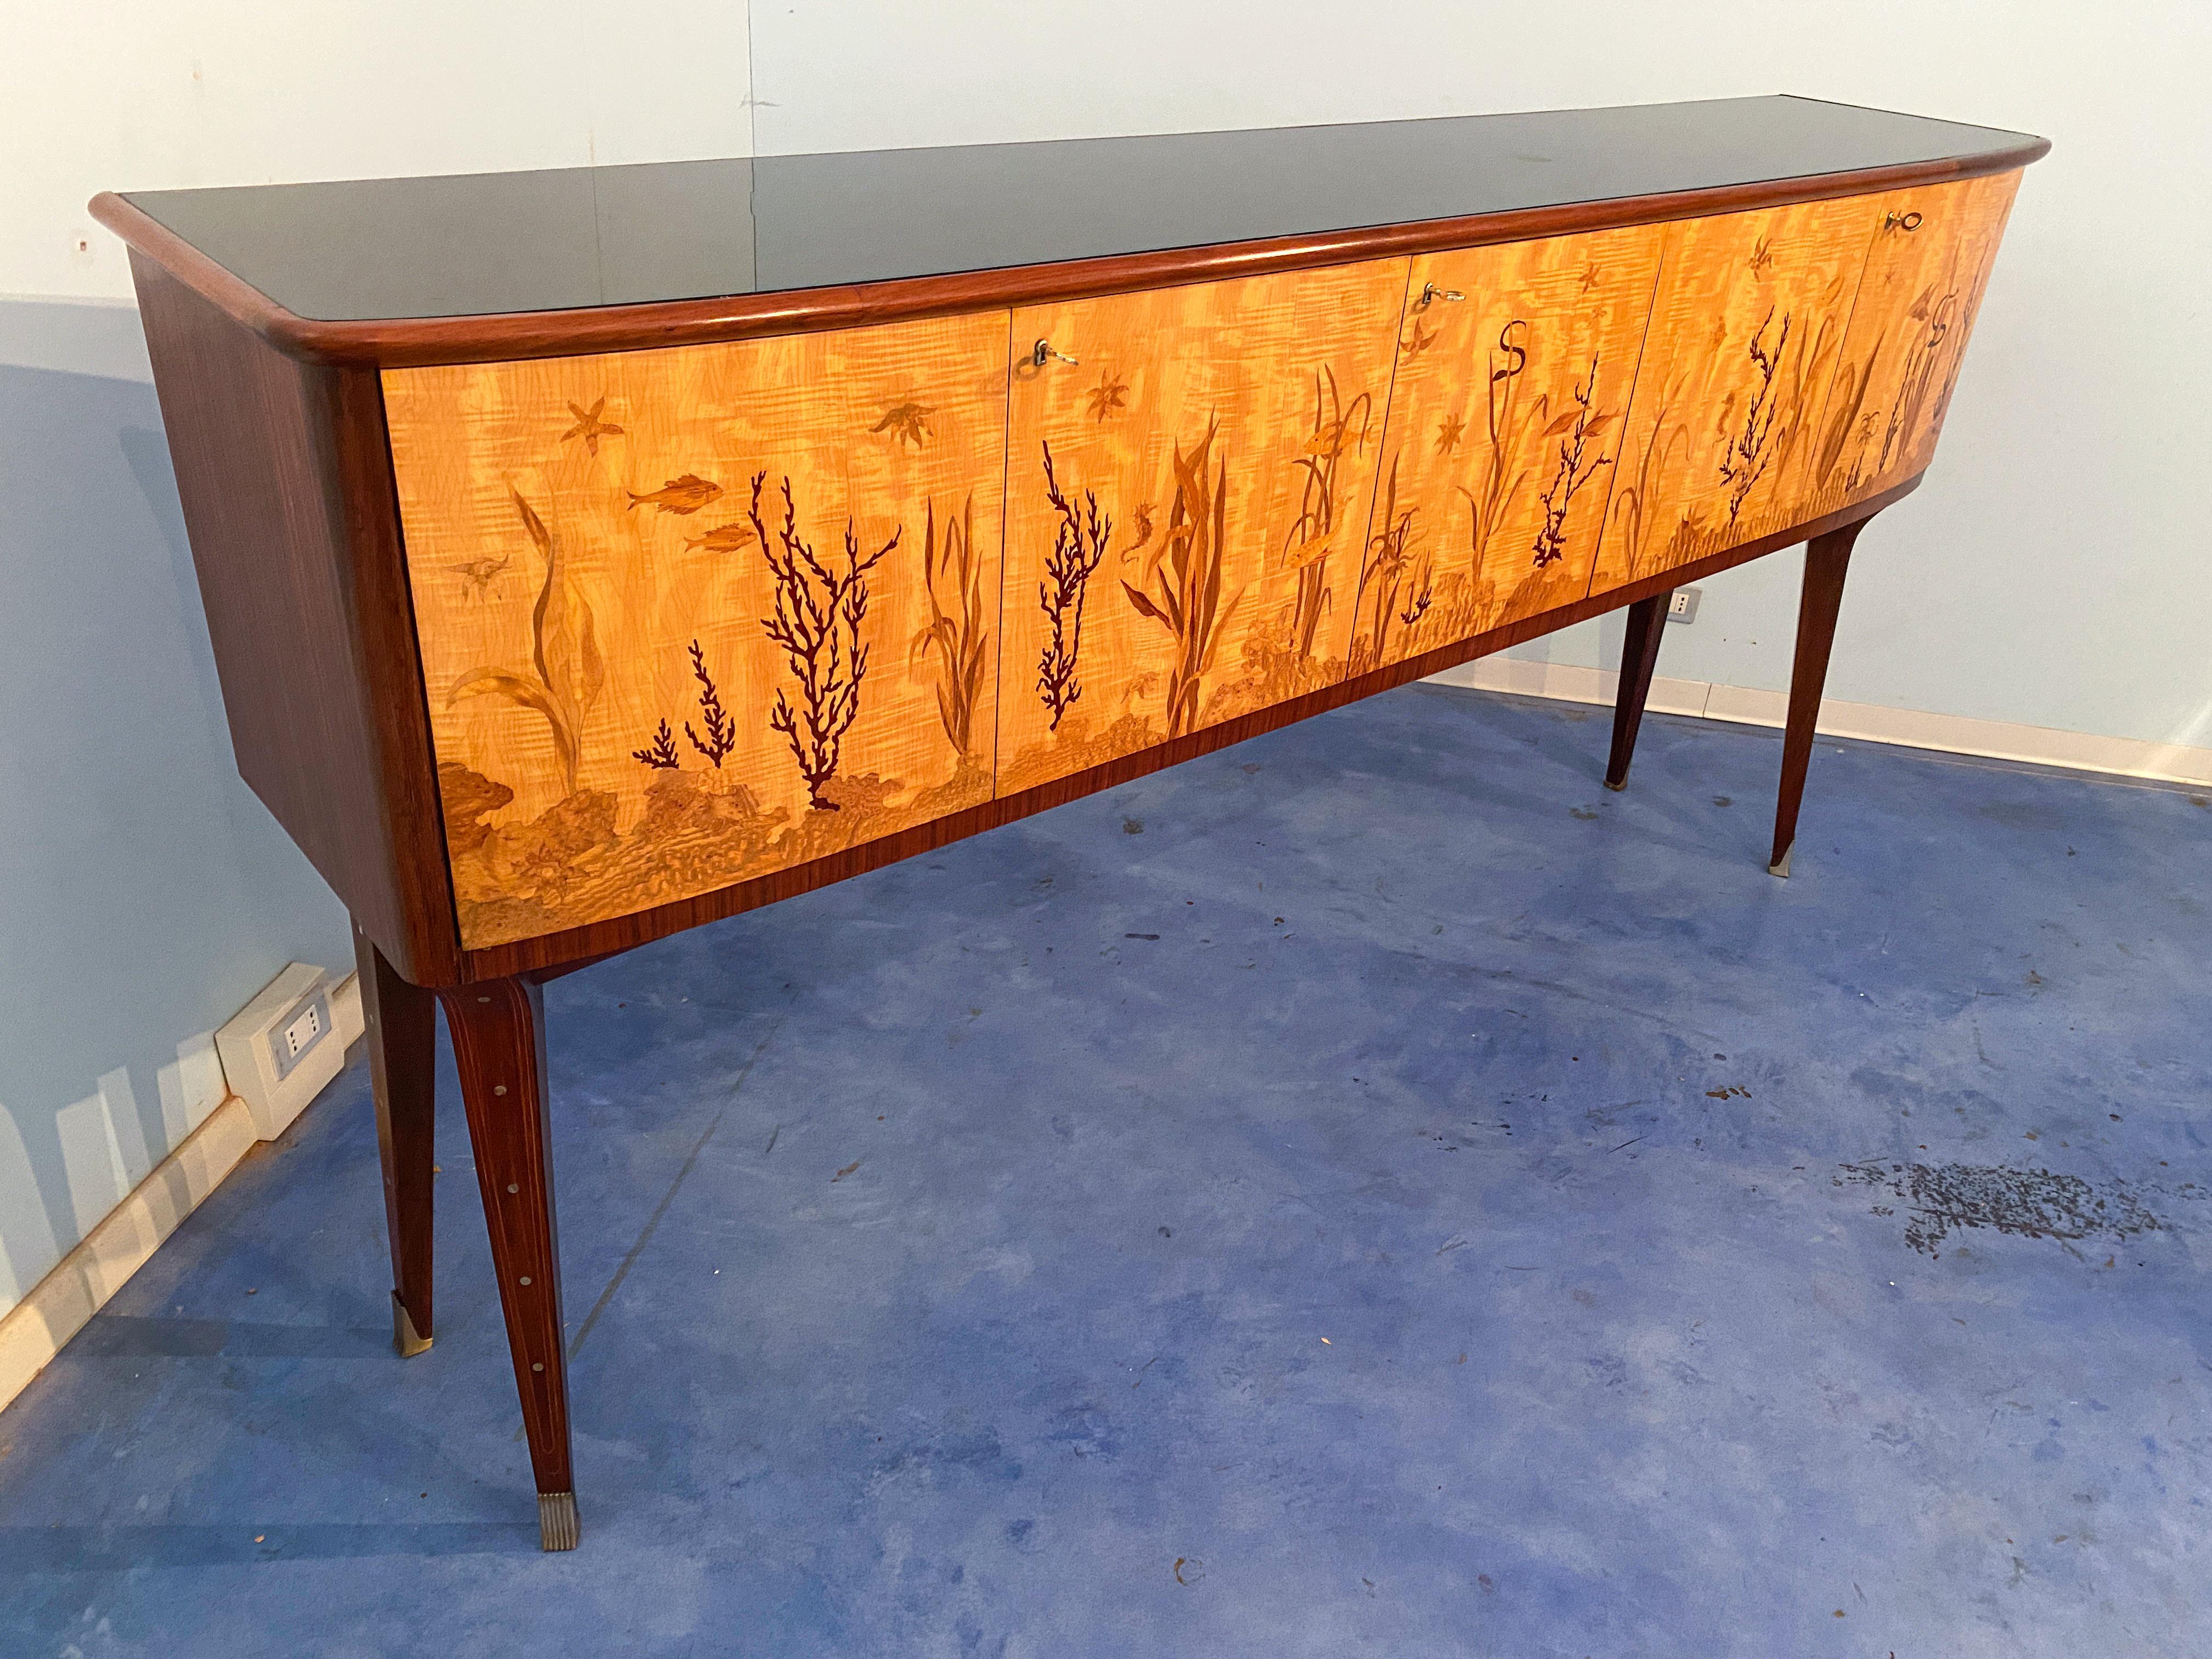 Italian Midcentury Inlaid Maple Sideboard by Andrea Gusmai, 1950s For Sale 7